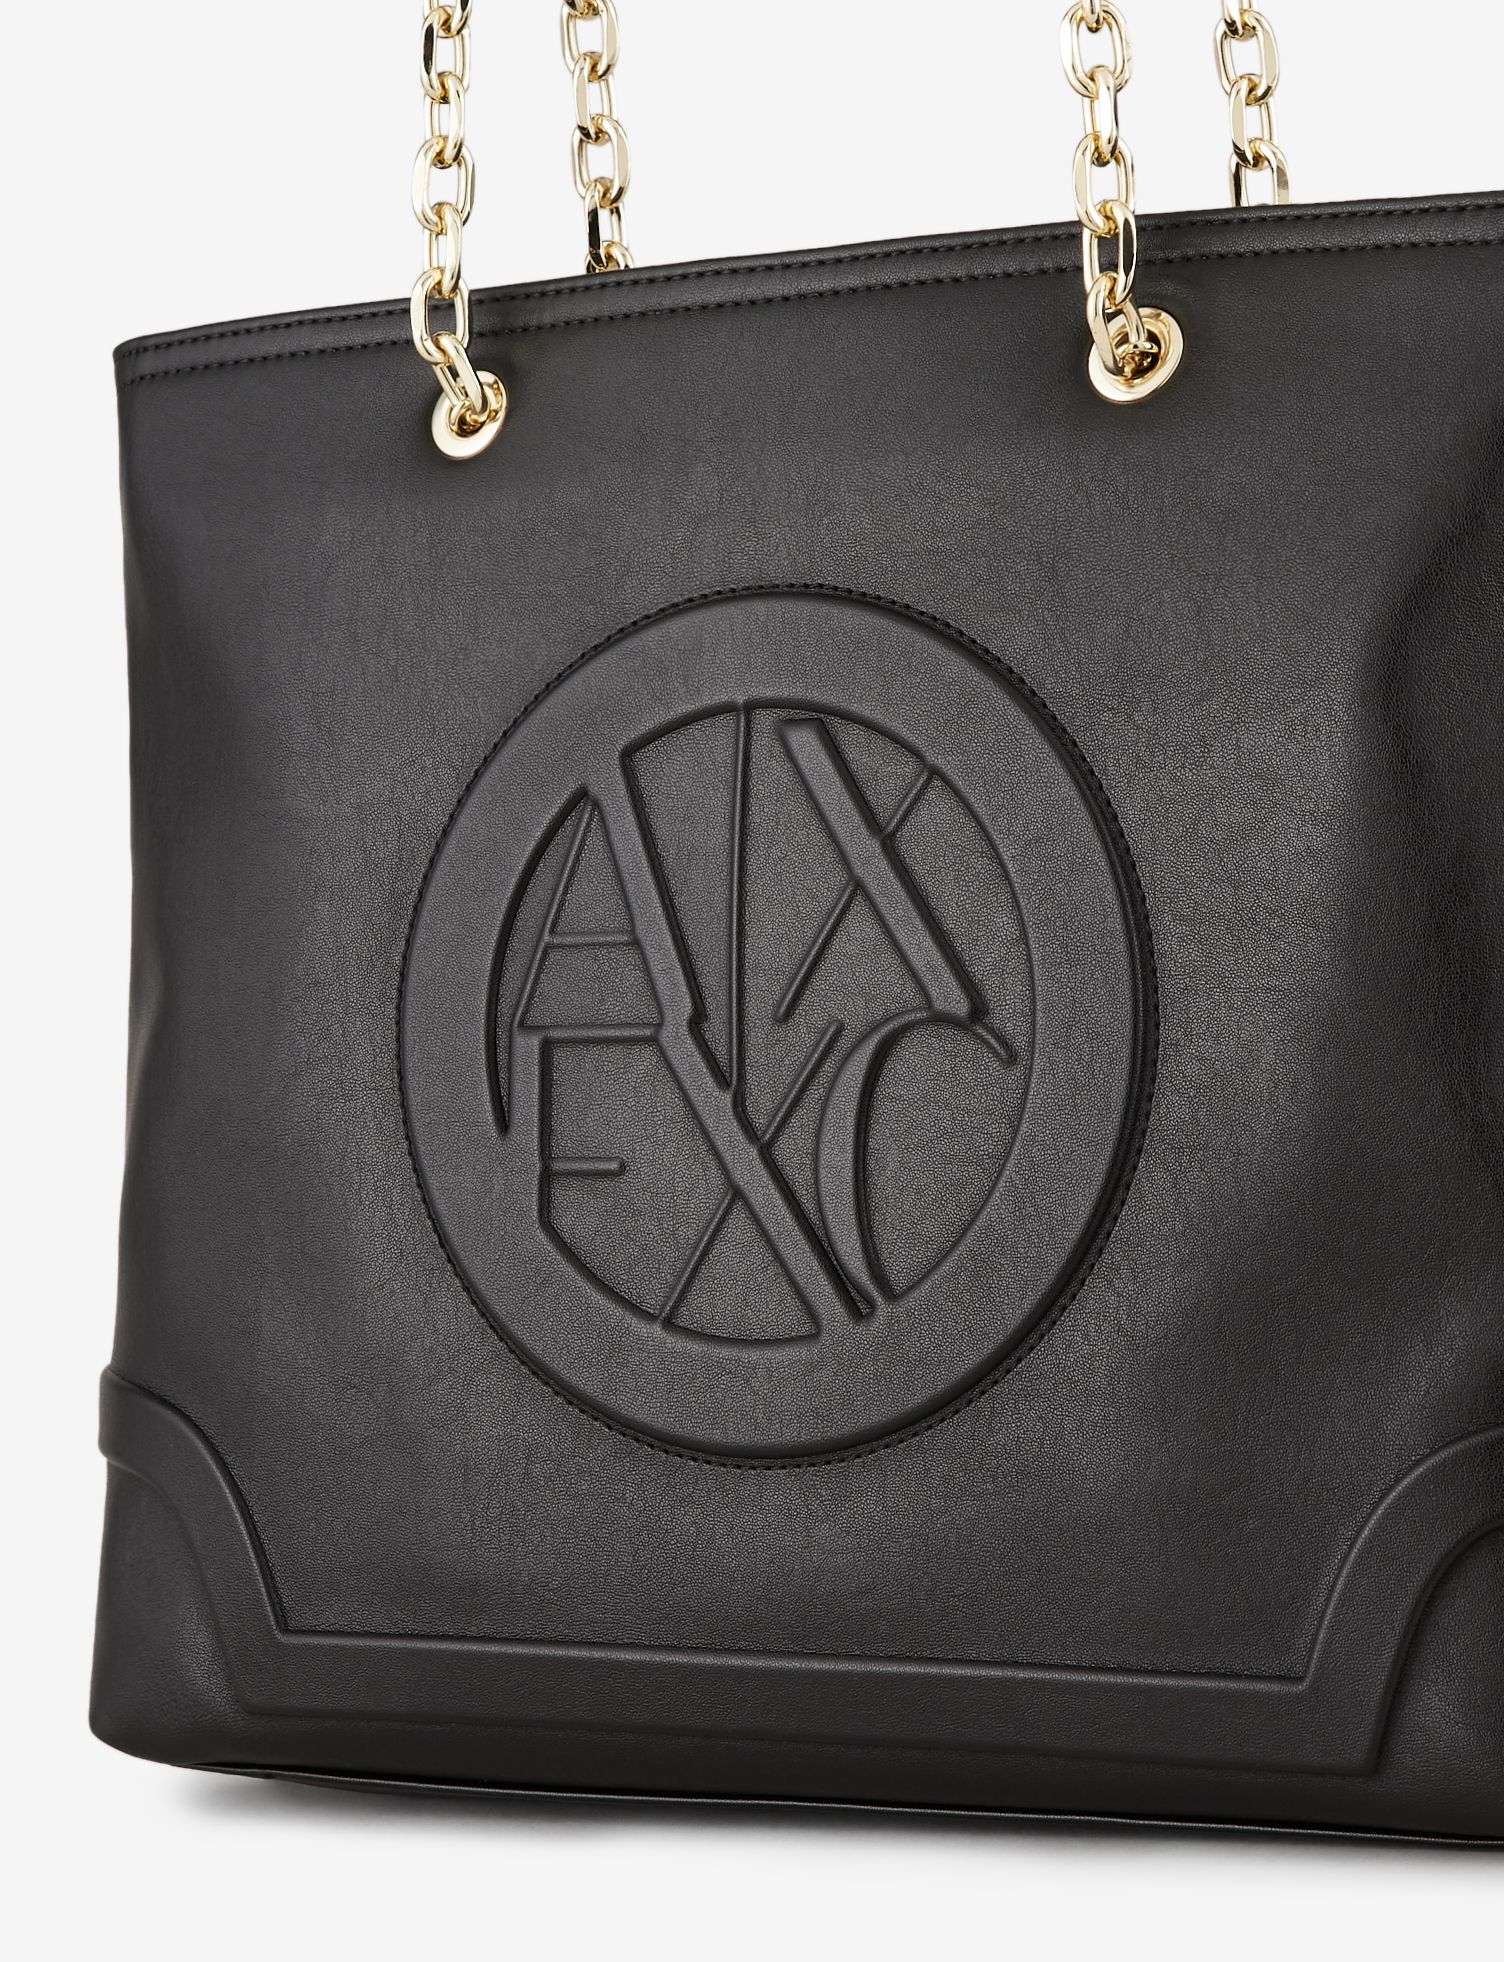 Armani Exchange Tote Bag With Gold Chain Detail Handle